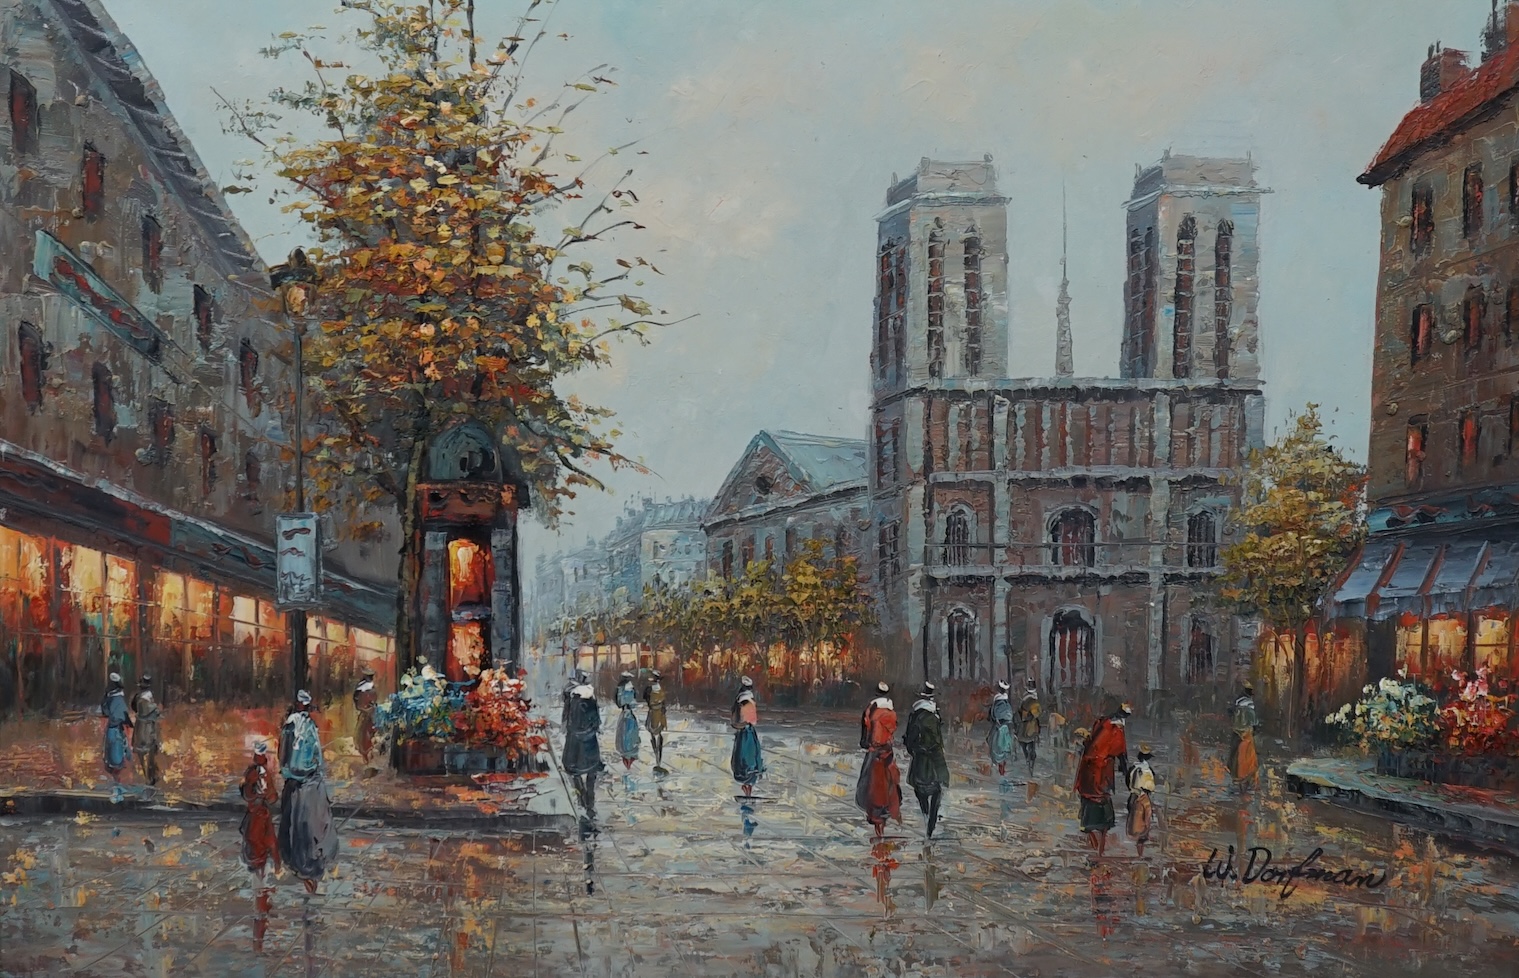 French, oil on canvas, Parisian street scene, indistinctly signed lower right, 59 x 90cm, gilt framed. Condition - good